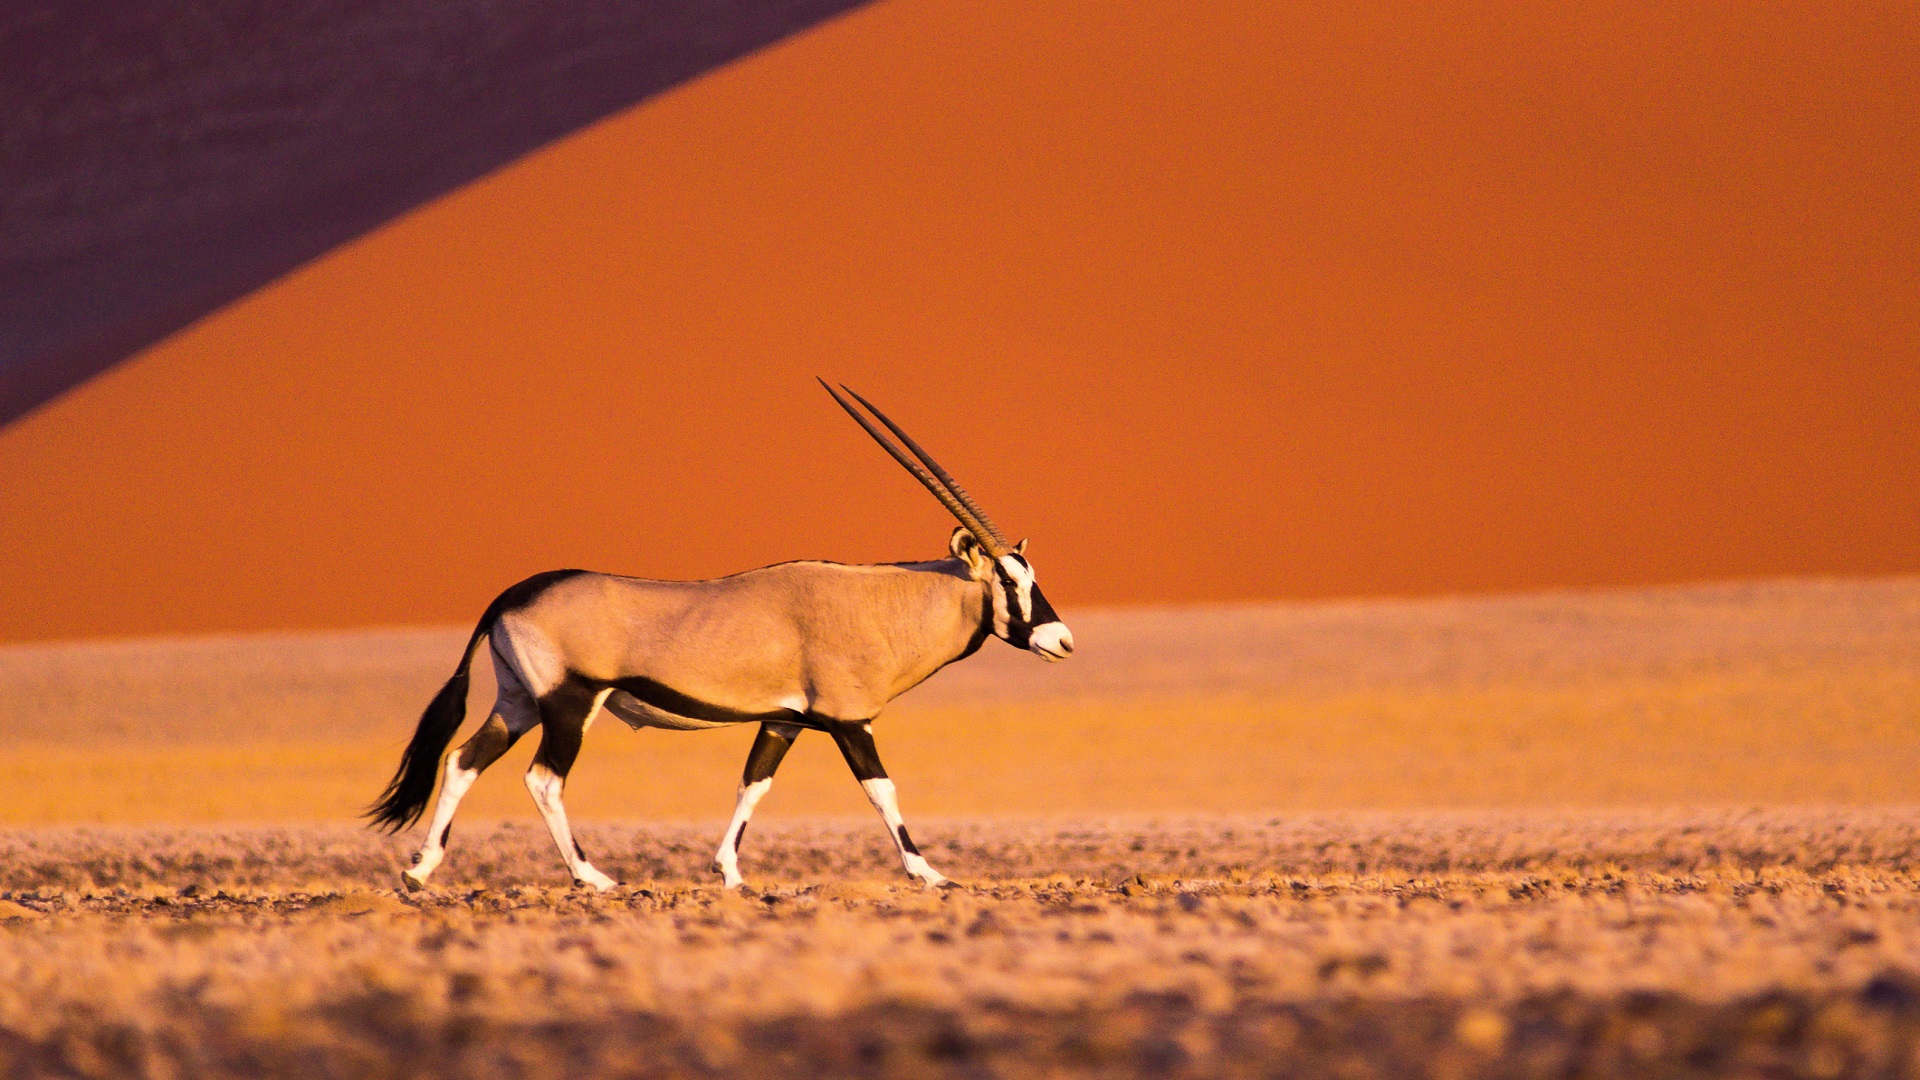 Oryx HD Wallpaper Image In Collection